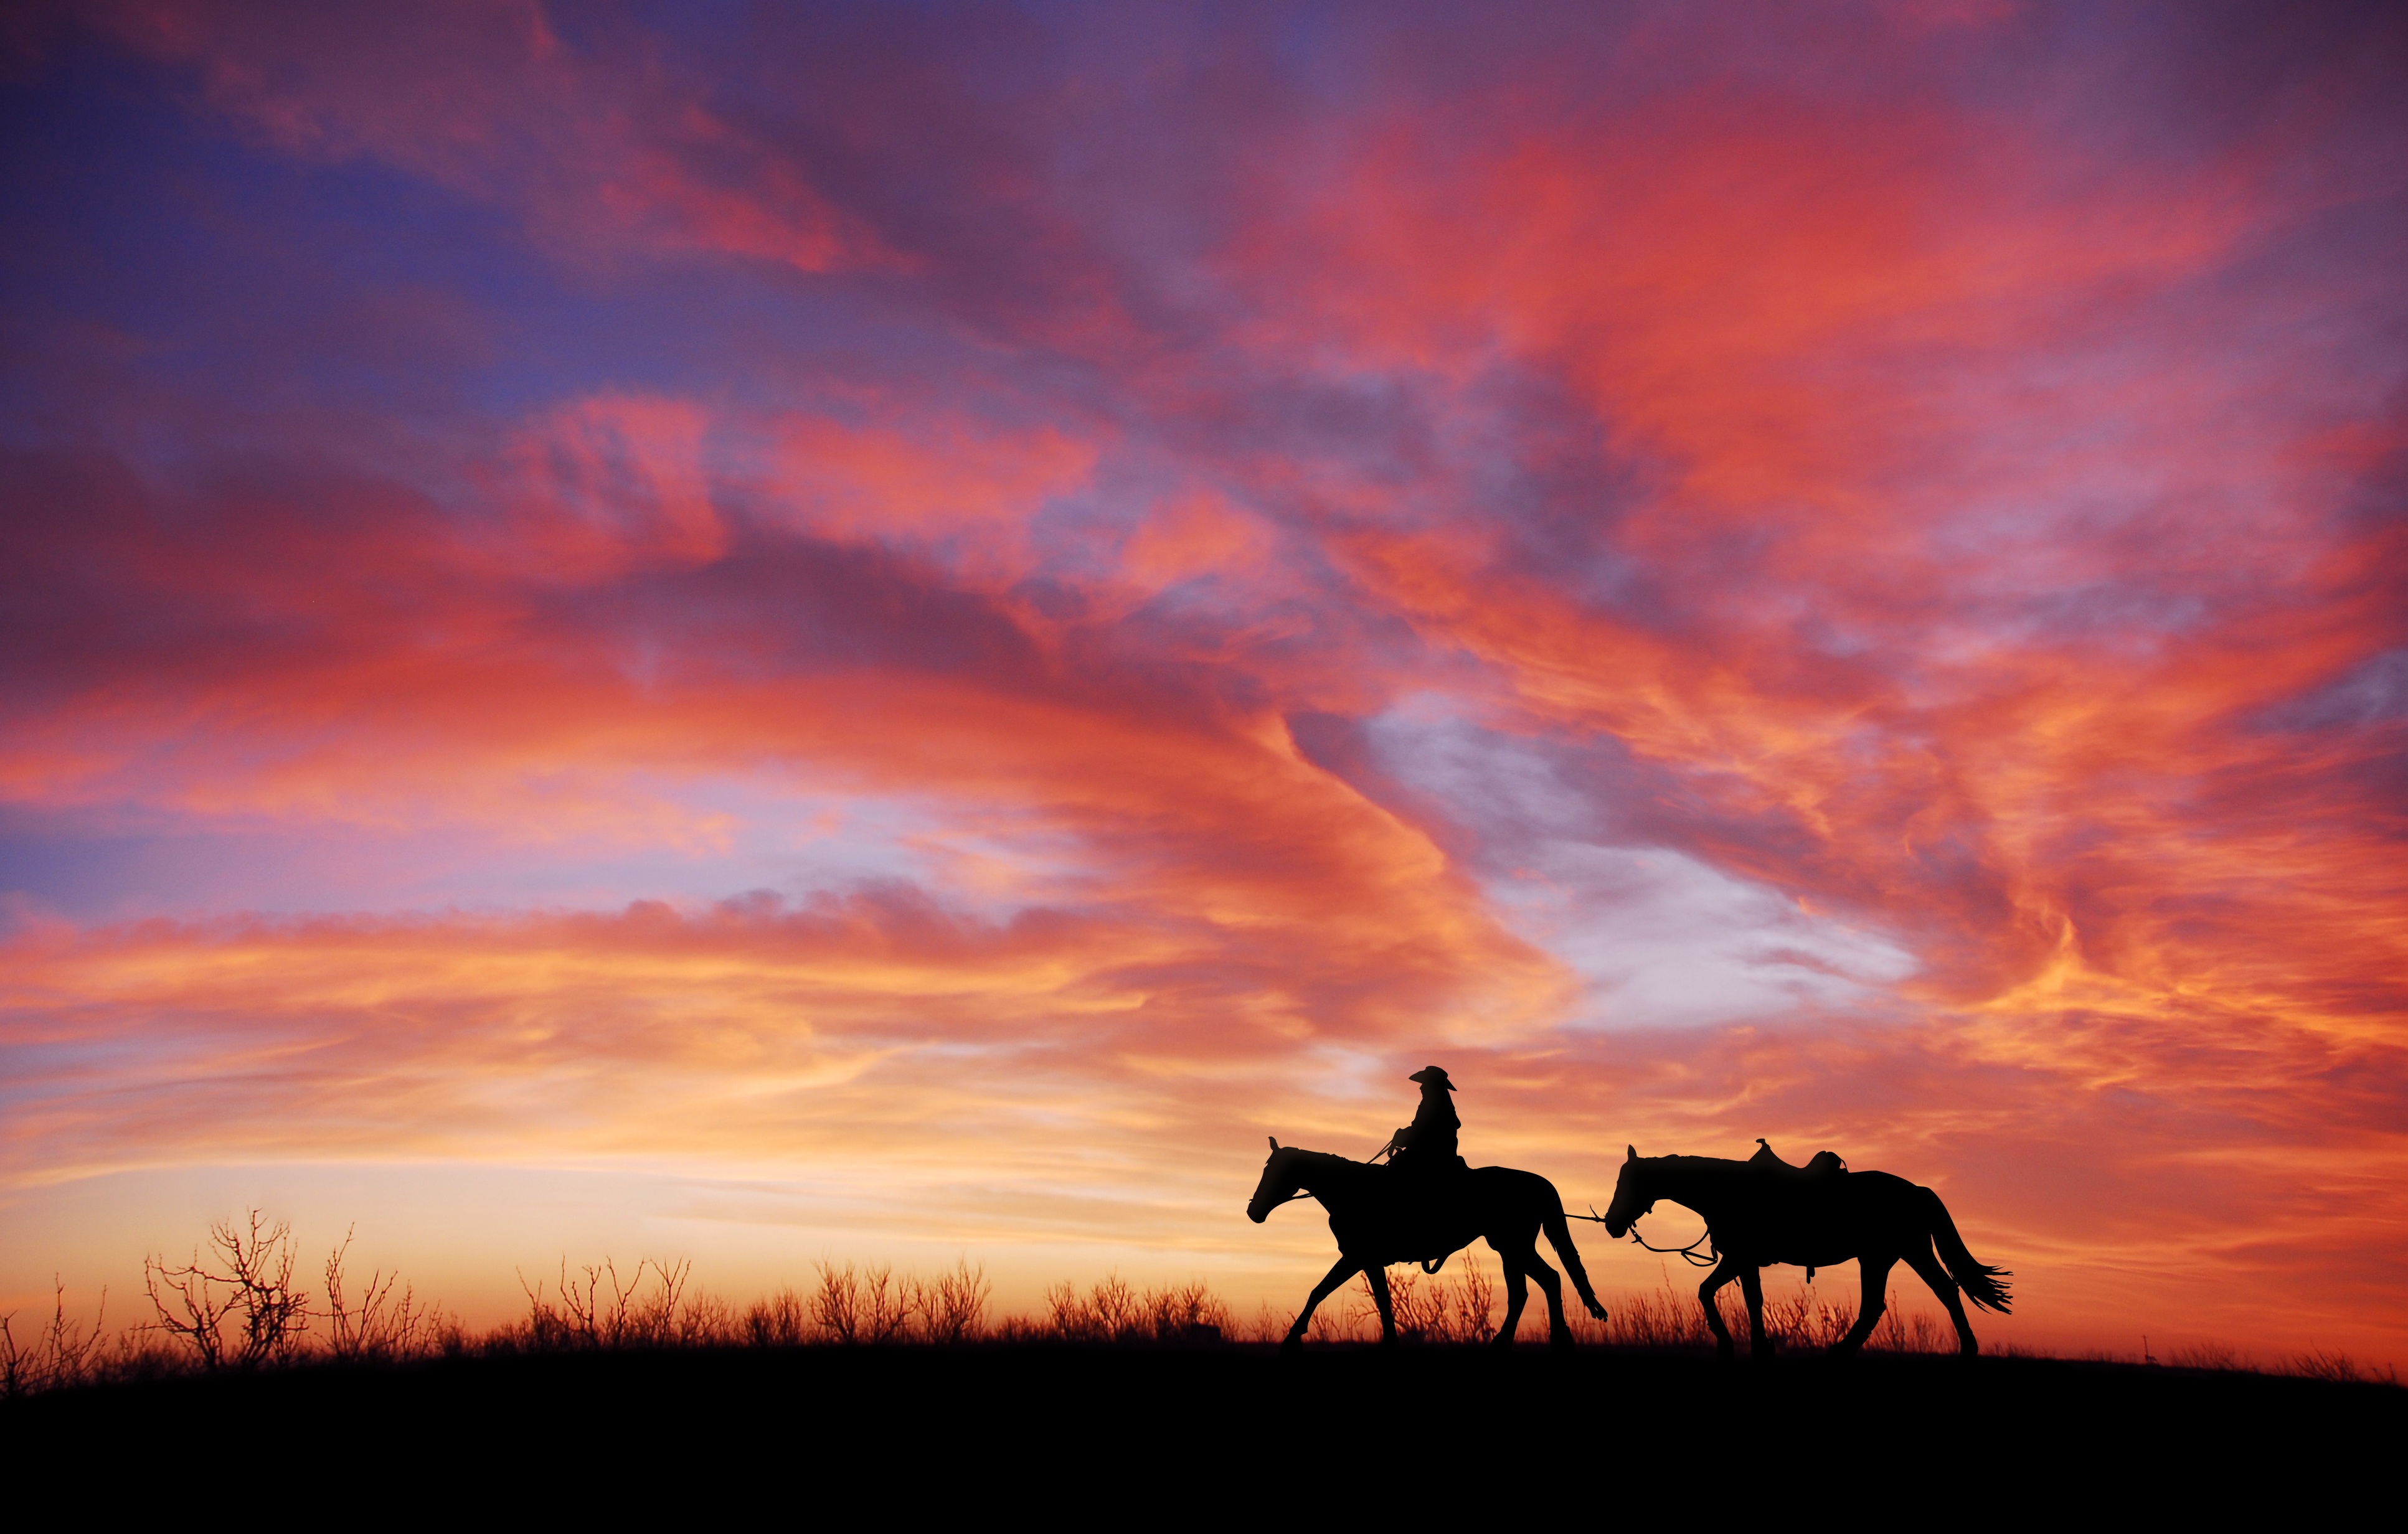 Horses In The Sunset - HD Wallpaper 